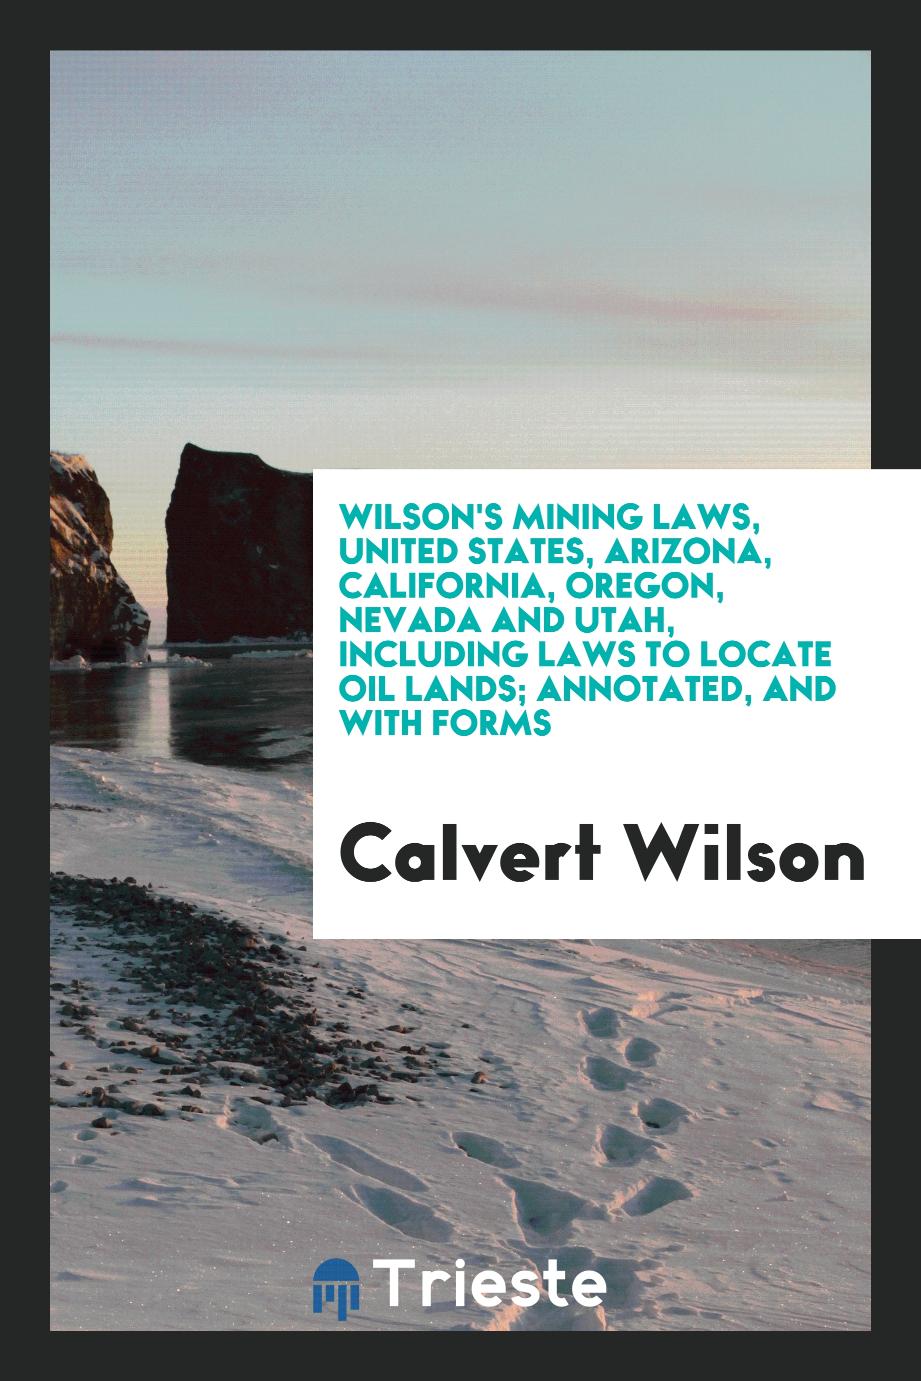 Wilson's mining laws, United States, Arizona, California, Oregon, Nevada and Utah, including laws to locate oil lands; annotated, and with forms